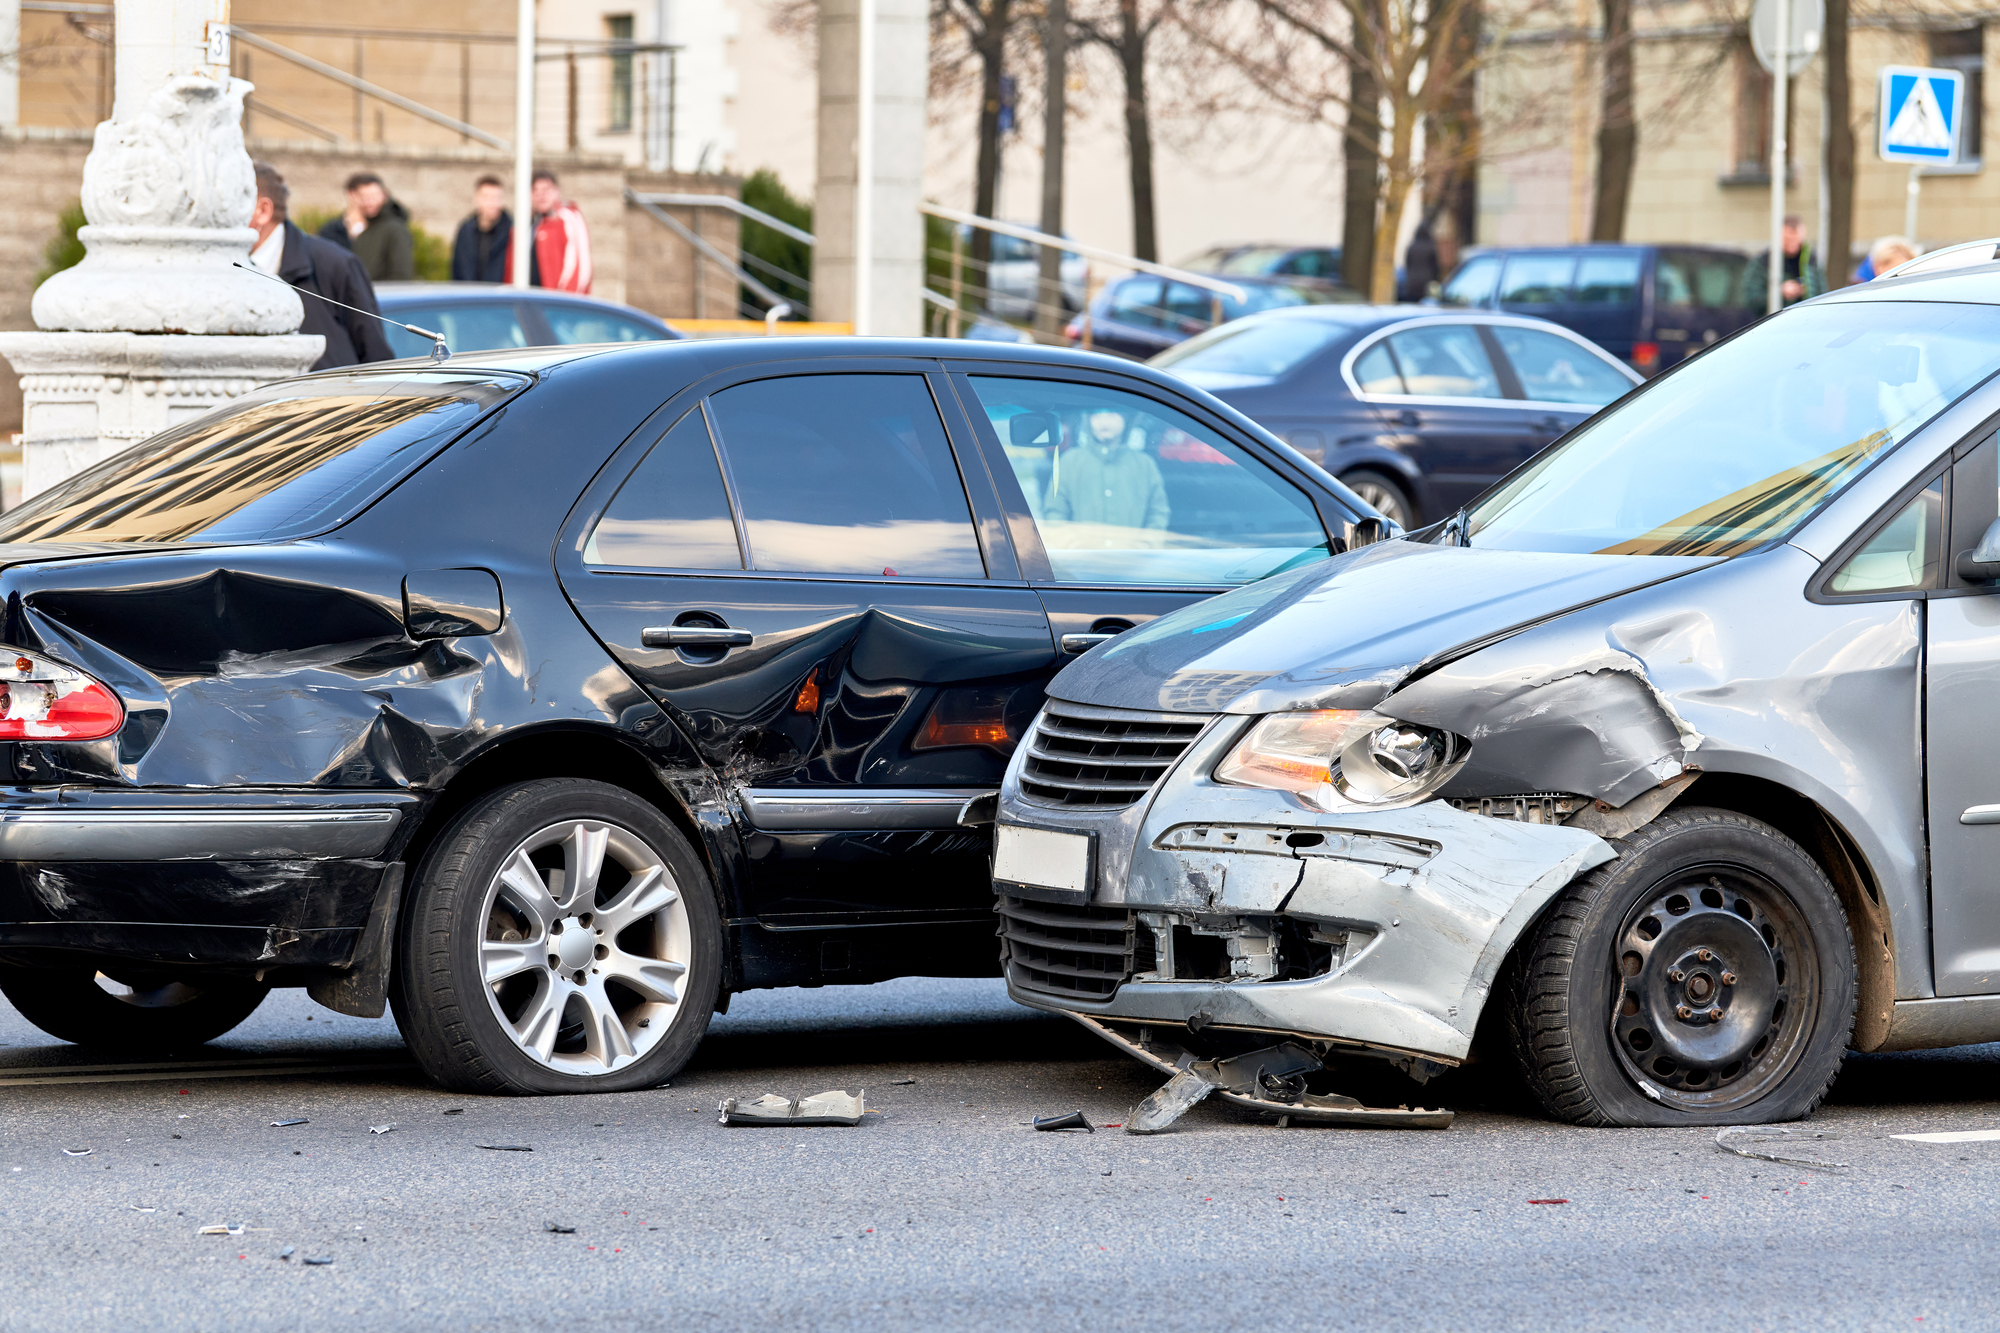 Challenges in Proving Negligence in Broward County Traffic Collisions